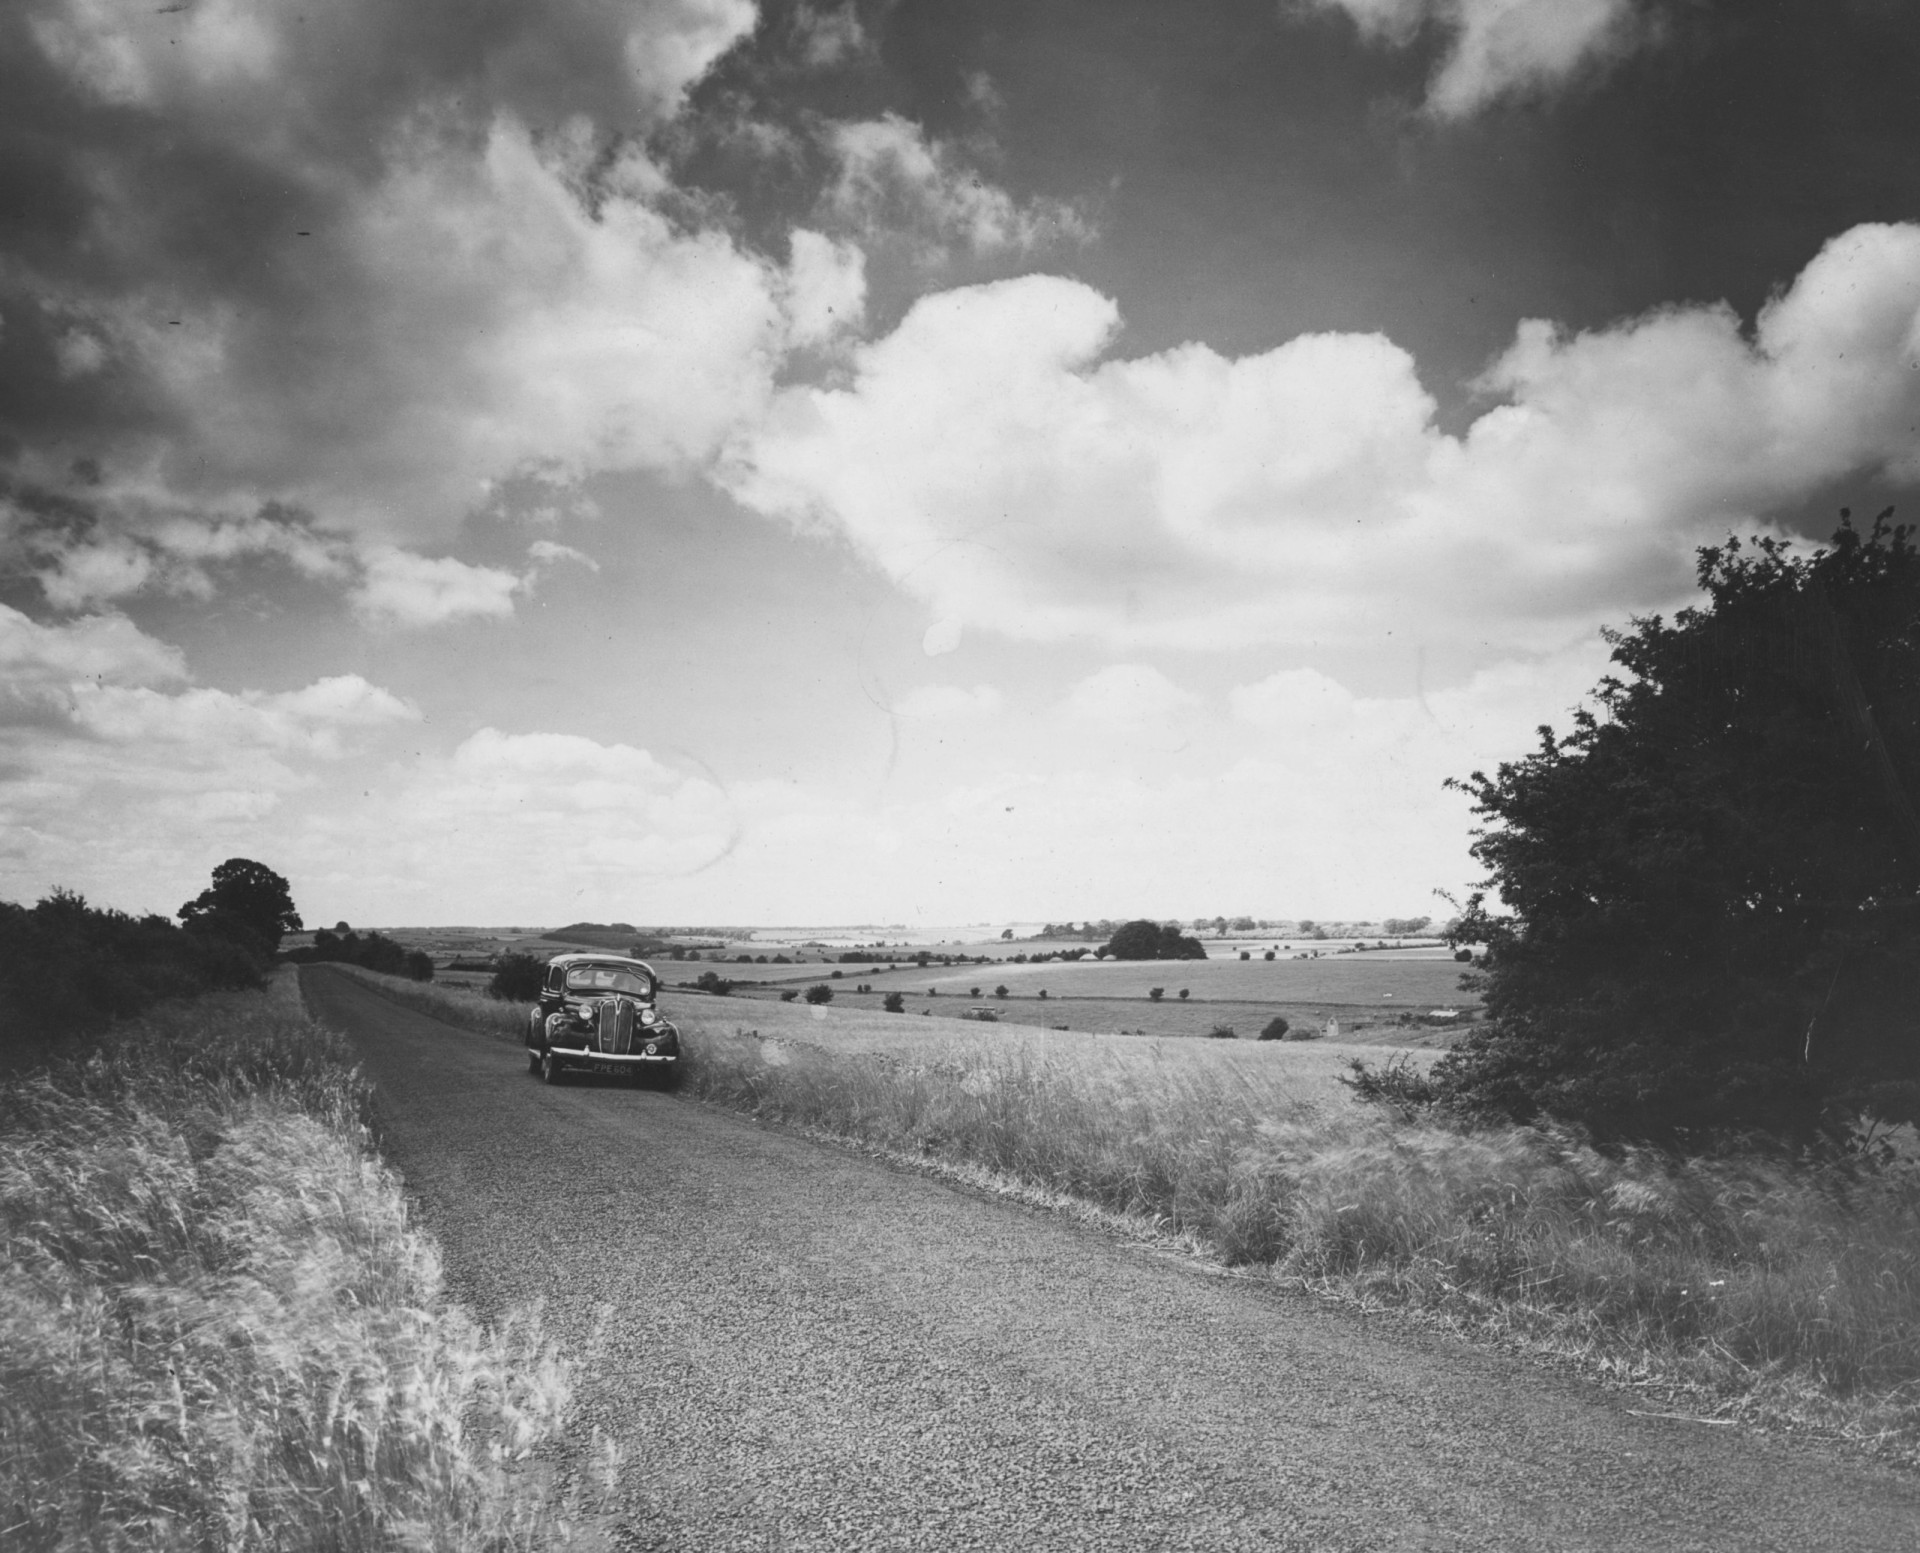 <p>Roman roads remained in use for centuries. While they disappeared with time, new roads sprang up to follow their routes. Pictured in 1937 is a lane set parallel to Fosse Way, the Roman road in England that linked Isca Dumnoniorum (Exeter) with Lindum Colonia (Lincoln).</p><p>You may also like:<a href="https://www.starsinsider.com/n/135007?utm_source=msn.com&utm_medium=display&utm_campaign=referral_description&utm_content=697904en-us"> The real impact of alcohol in your body</a></p>